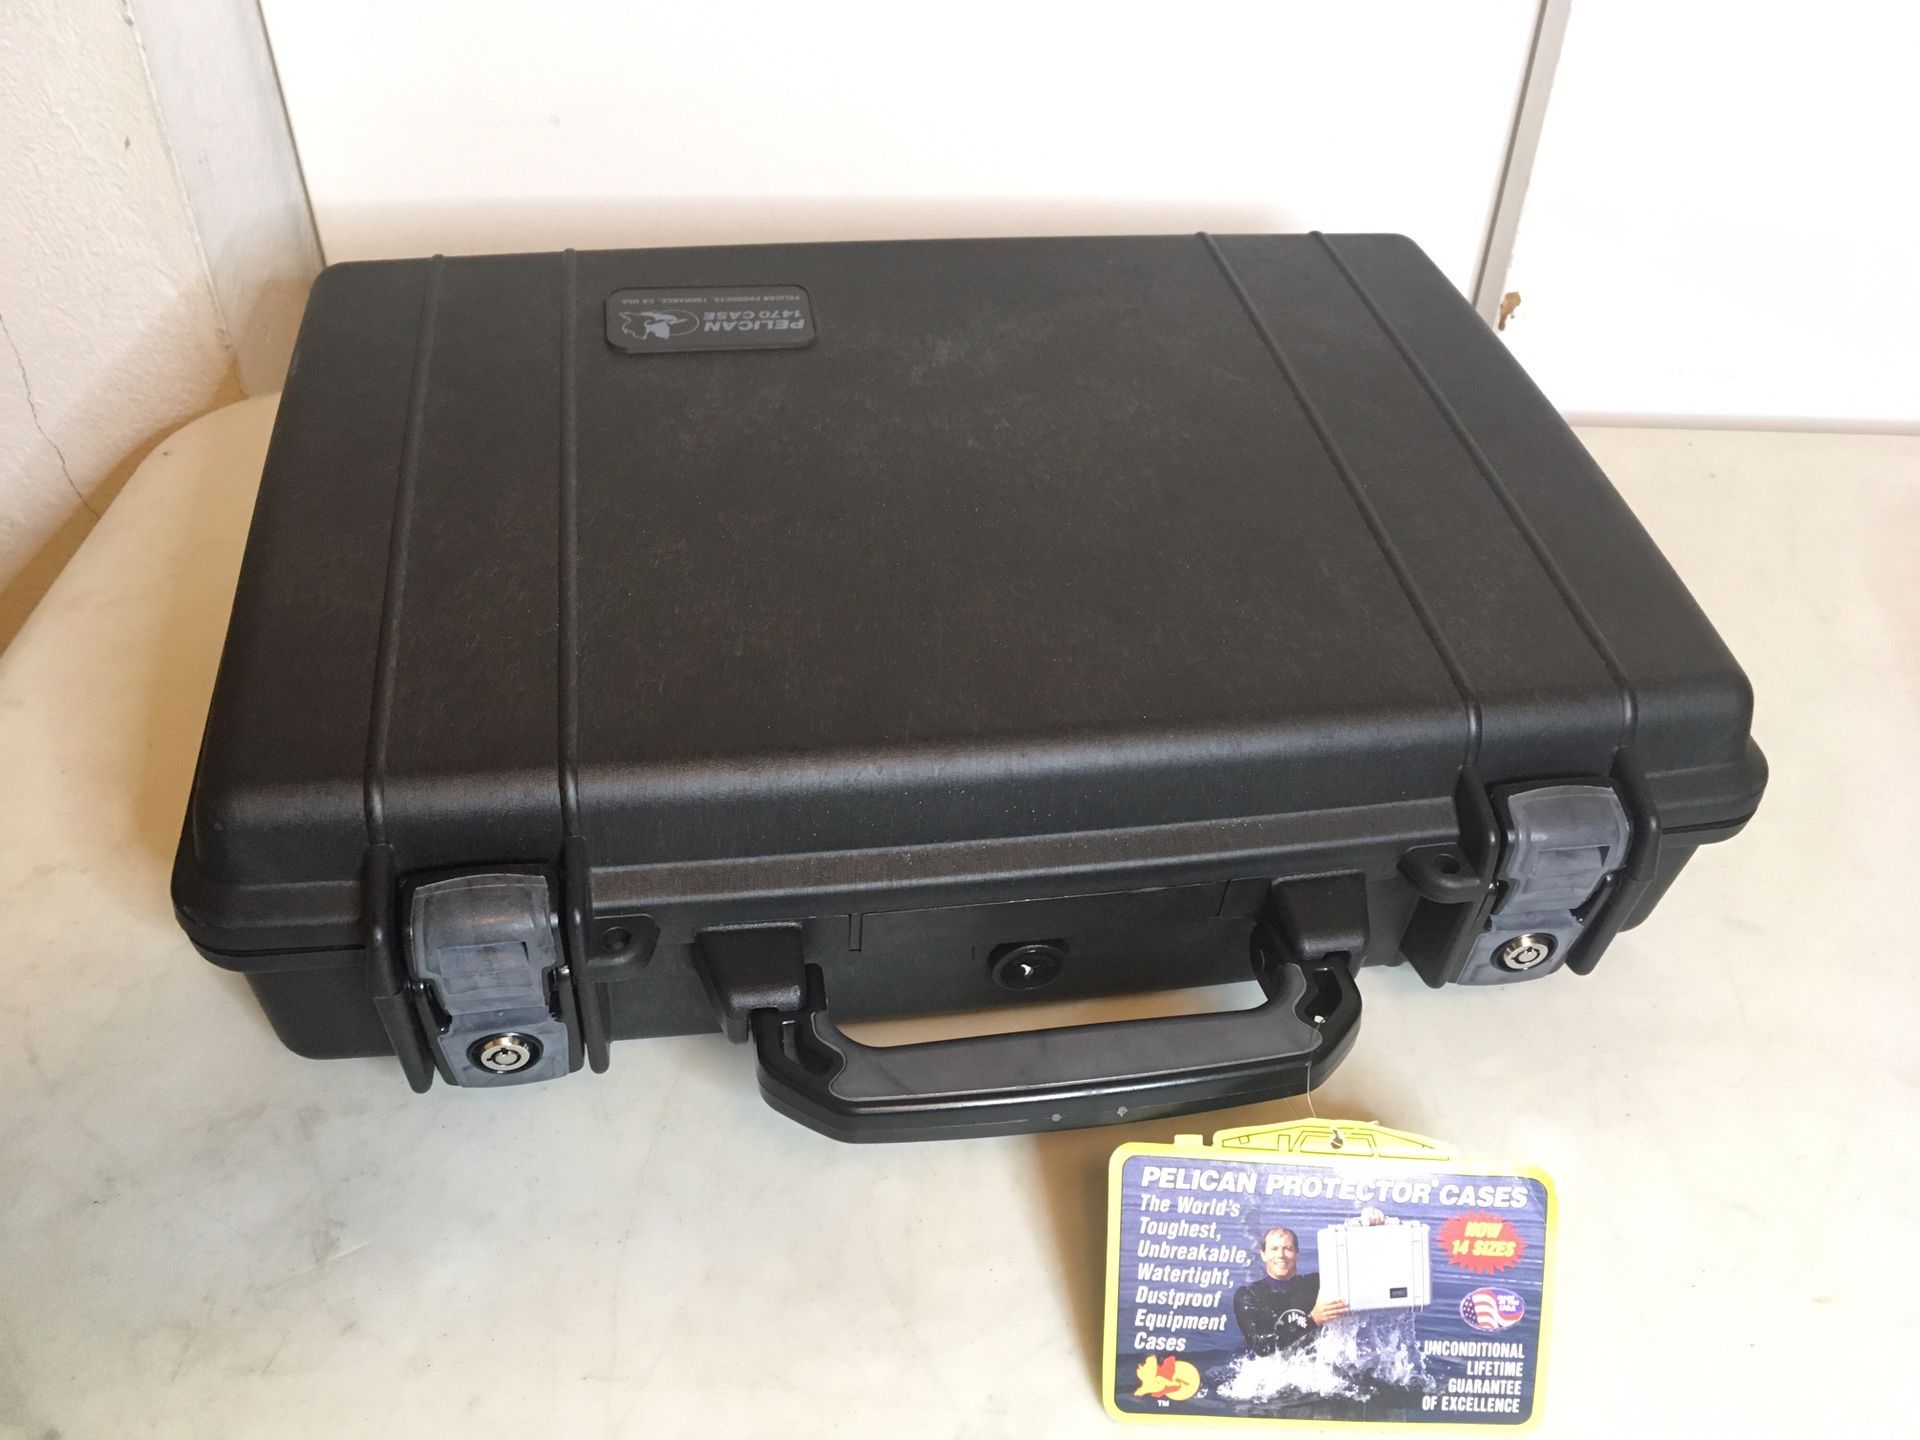 Pelican 1470 Watertight Briefcase Laptop Gun Valuables Etc. Case w/ Foam Insert  New (open box, never put into service), sold as pictured with shoulde